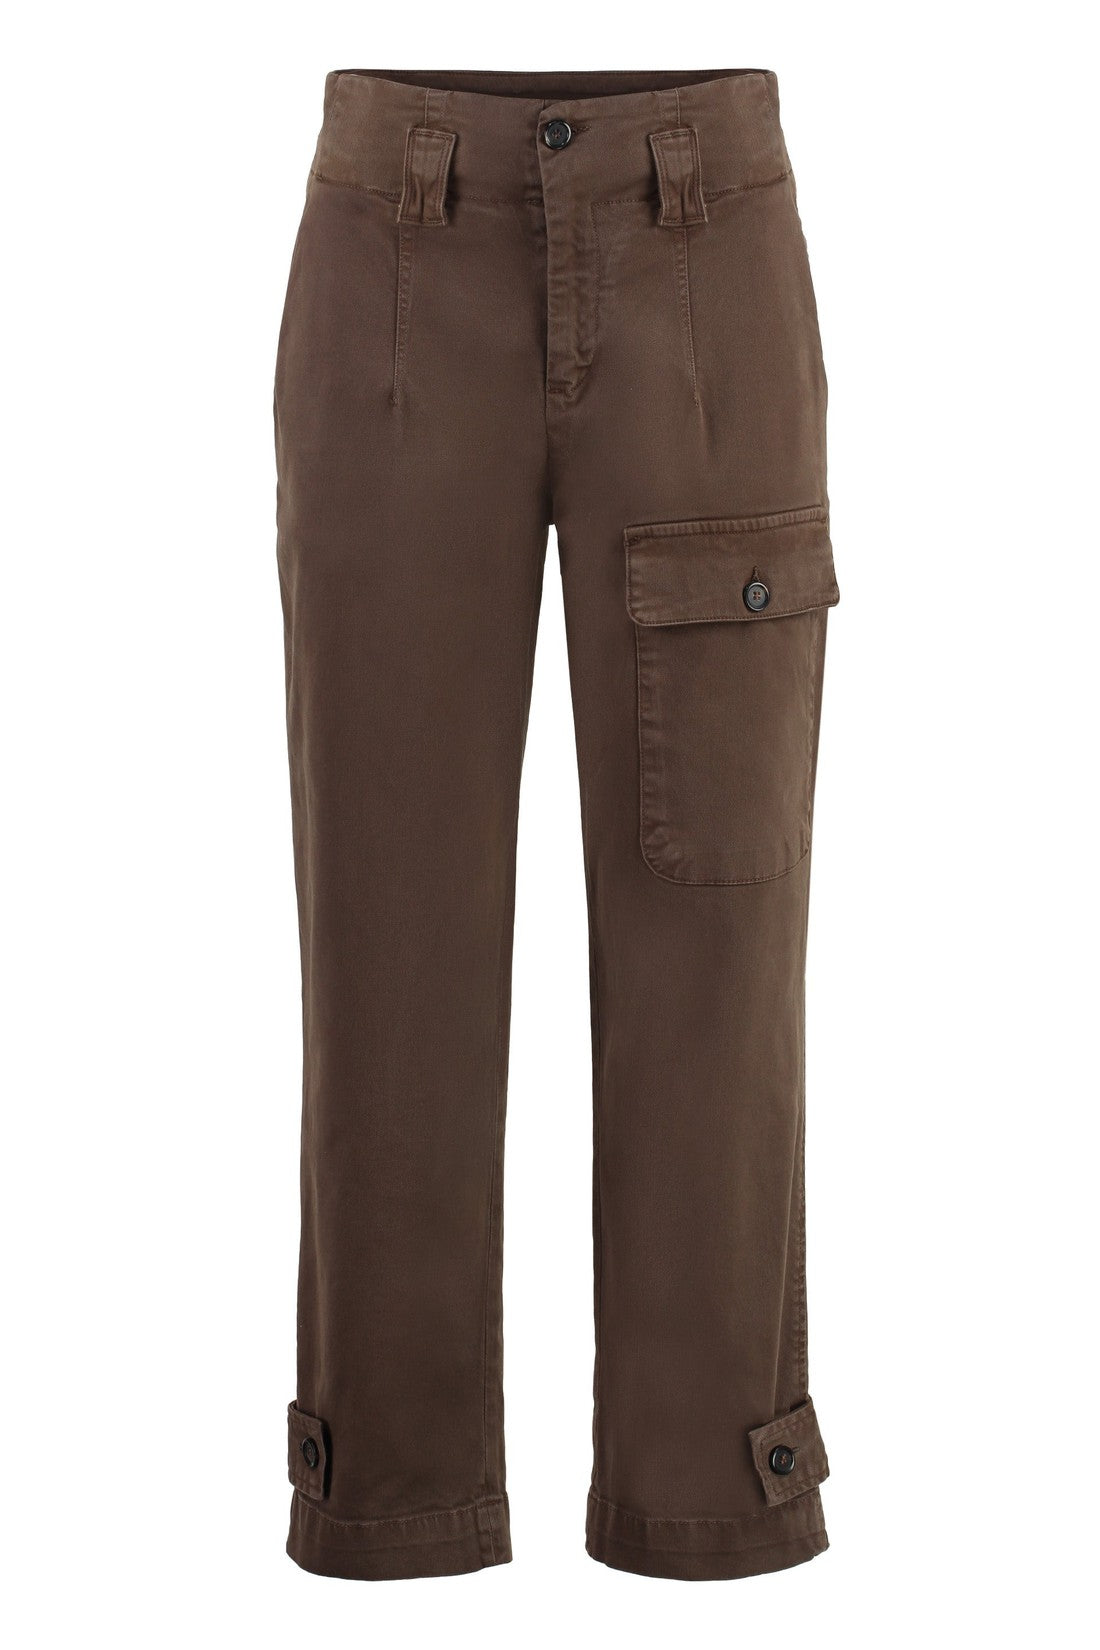 Pinko-OUTLET-SALE-Globo stretch cotton cargo trousers-ARCHIVIST